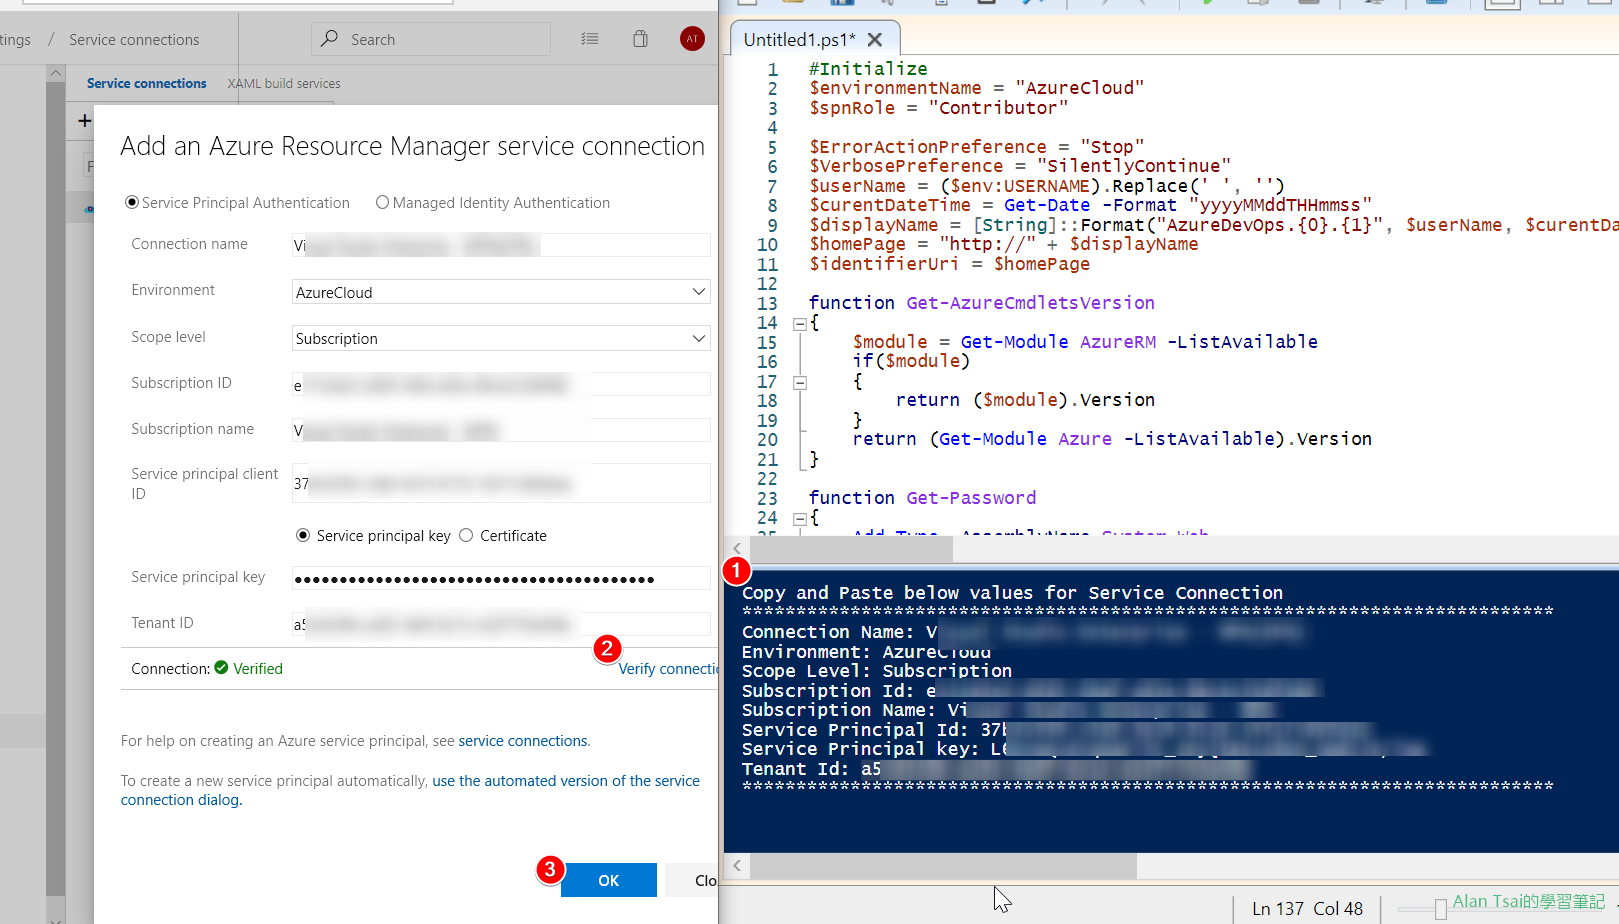 powershell_ise_2019-07-11_20-24-57.png